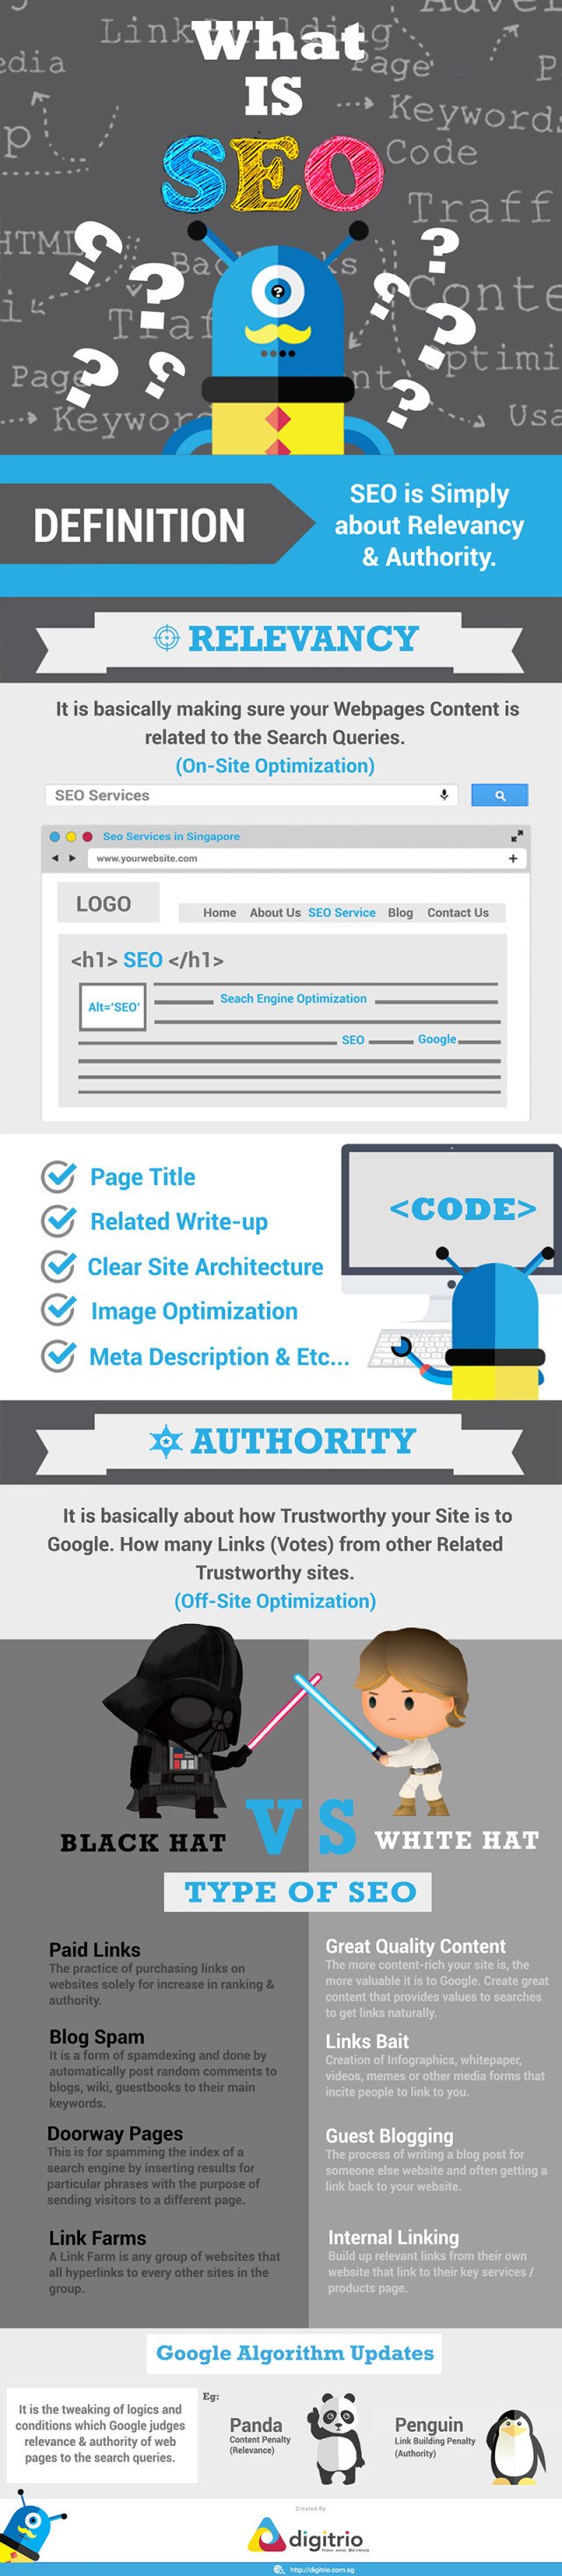 what-is-seo-infographic-640x2933.jpg